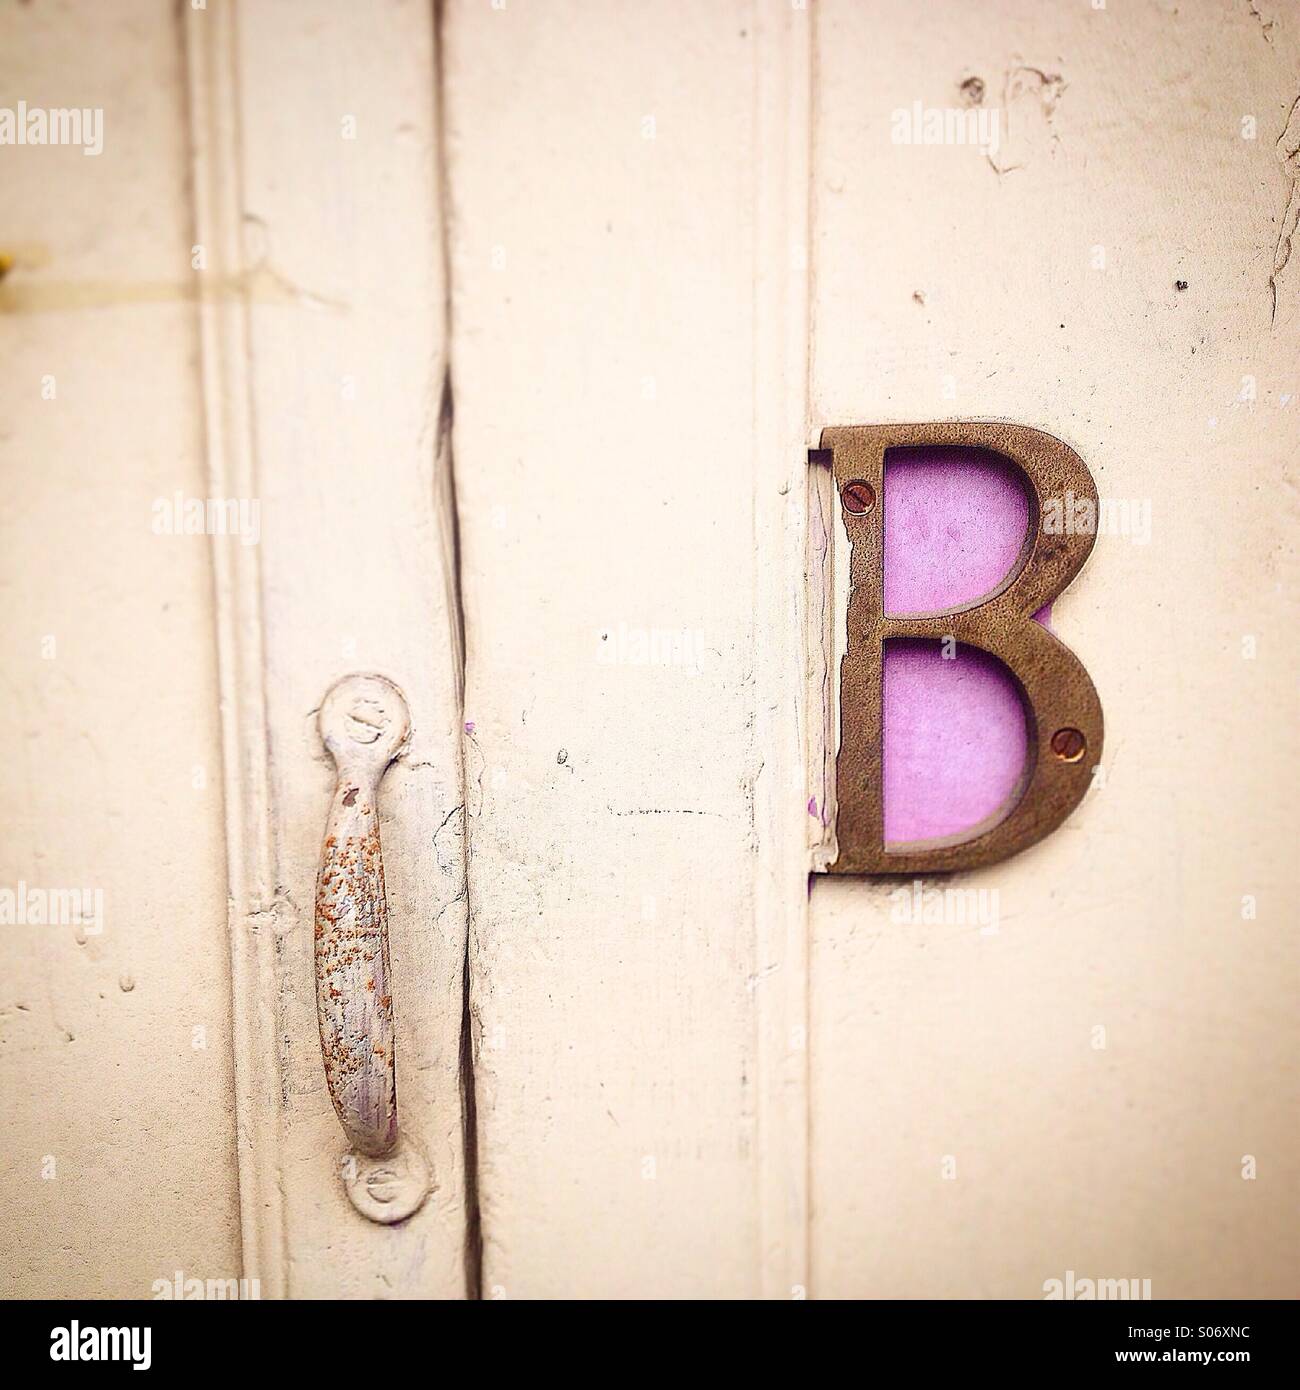 A letter 'B' decorates a door in a home in Colonia Roma, Mexico City, Mexico Stock Photo